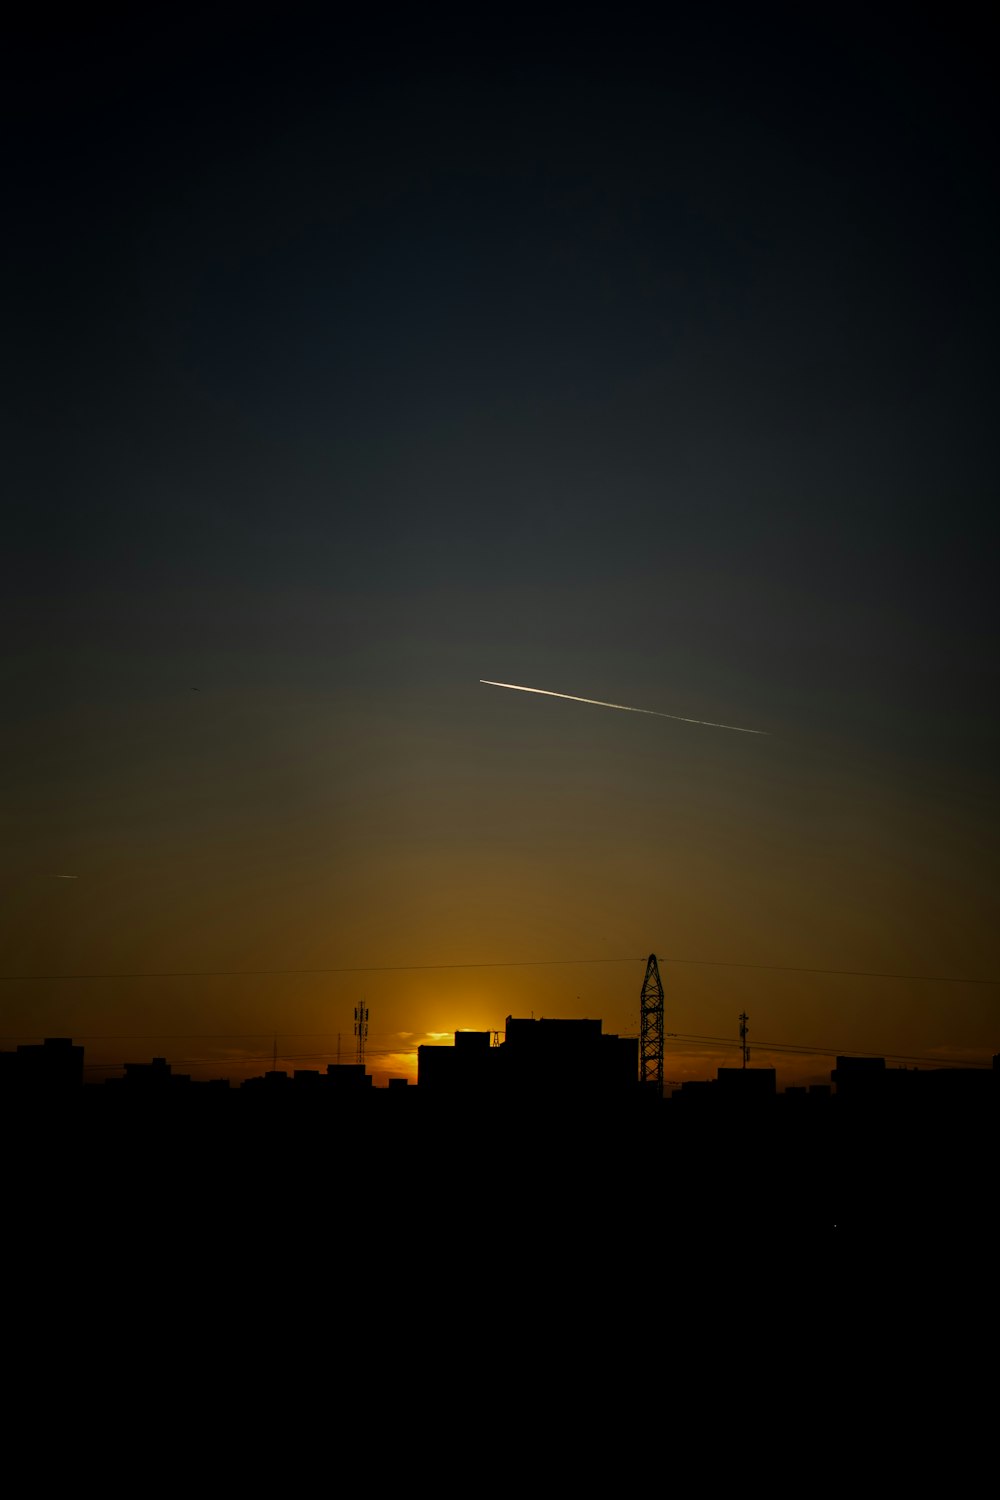 a plane flying over a city at sunset